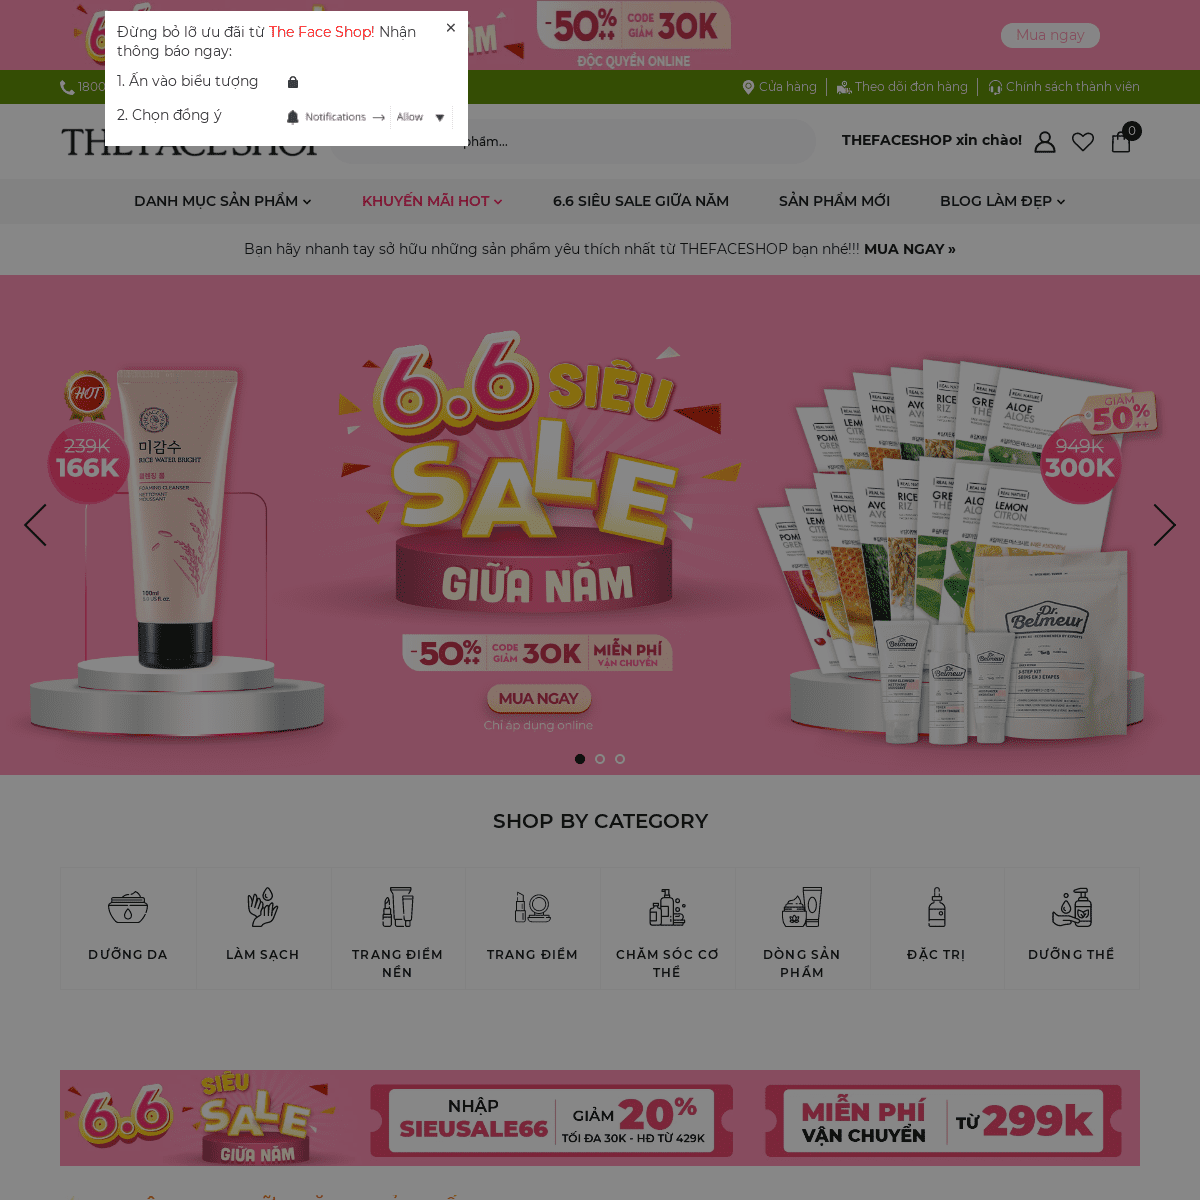 A complete backup of https://thefaceshop.com.vn